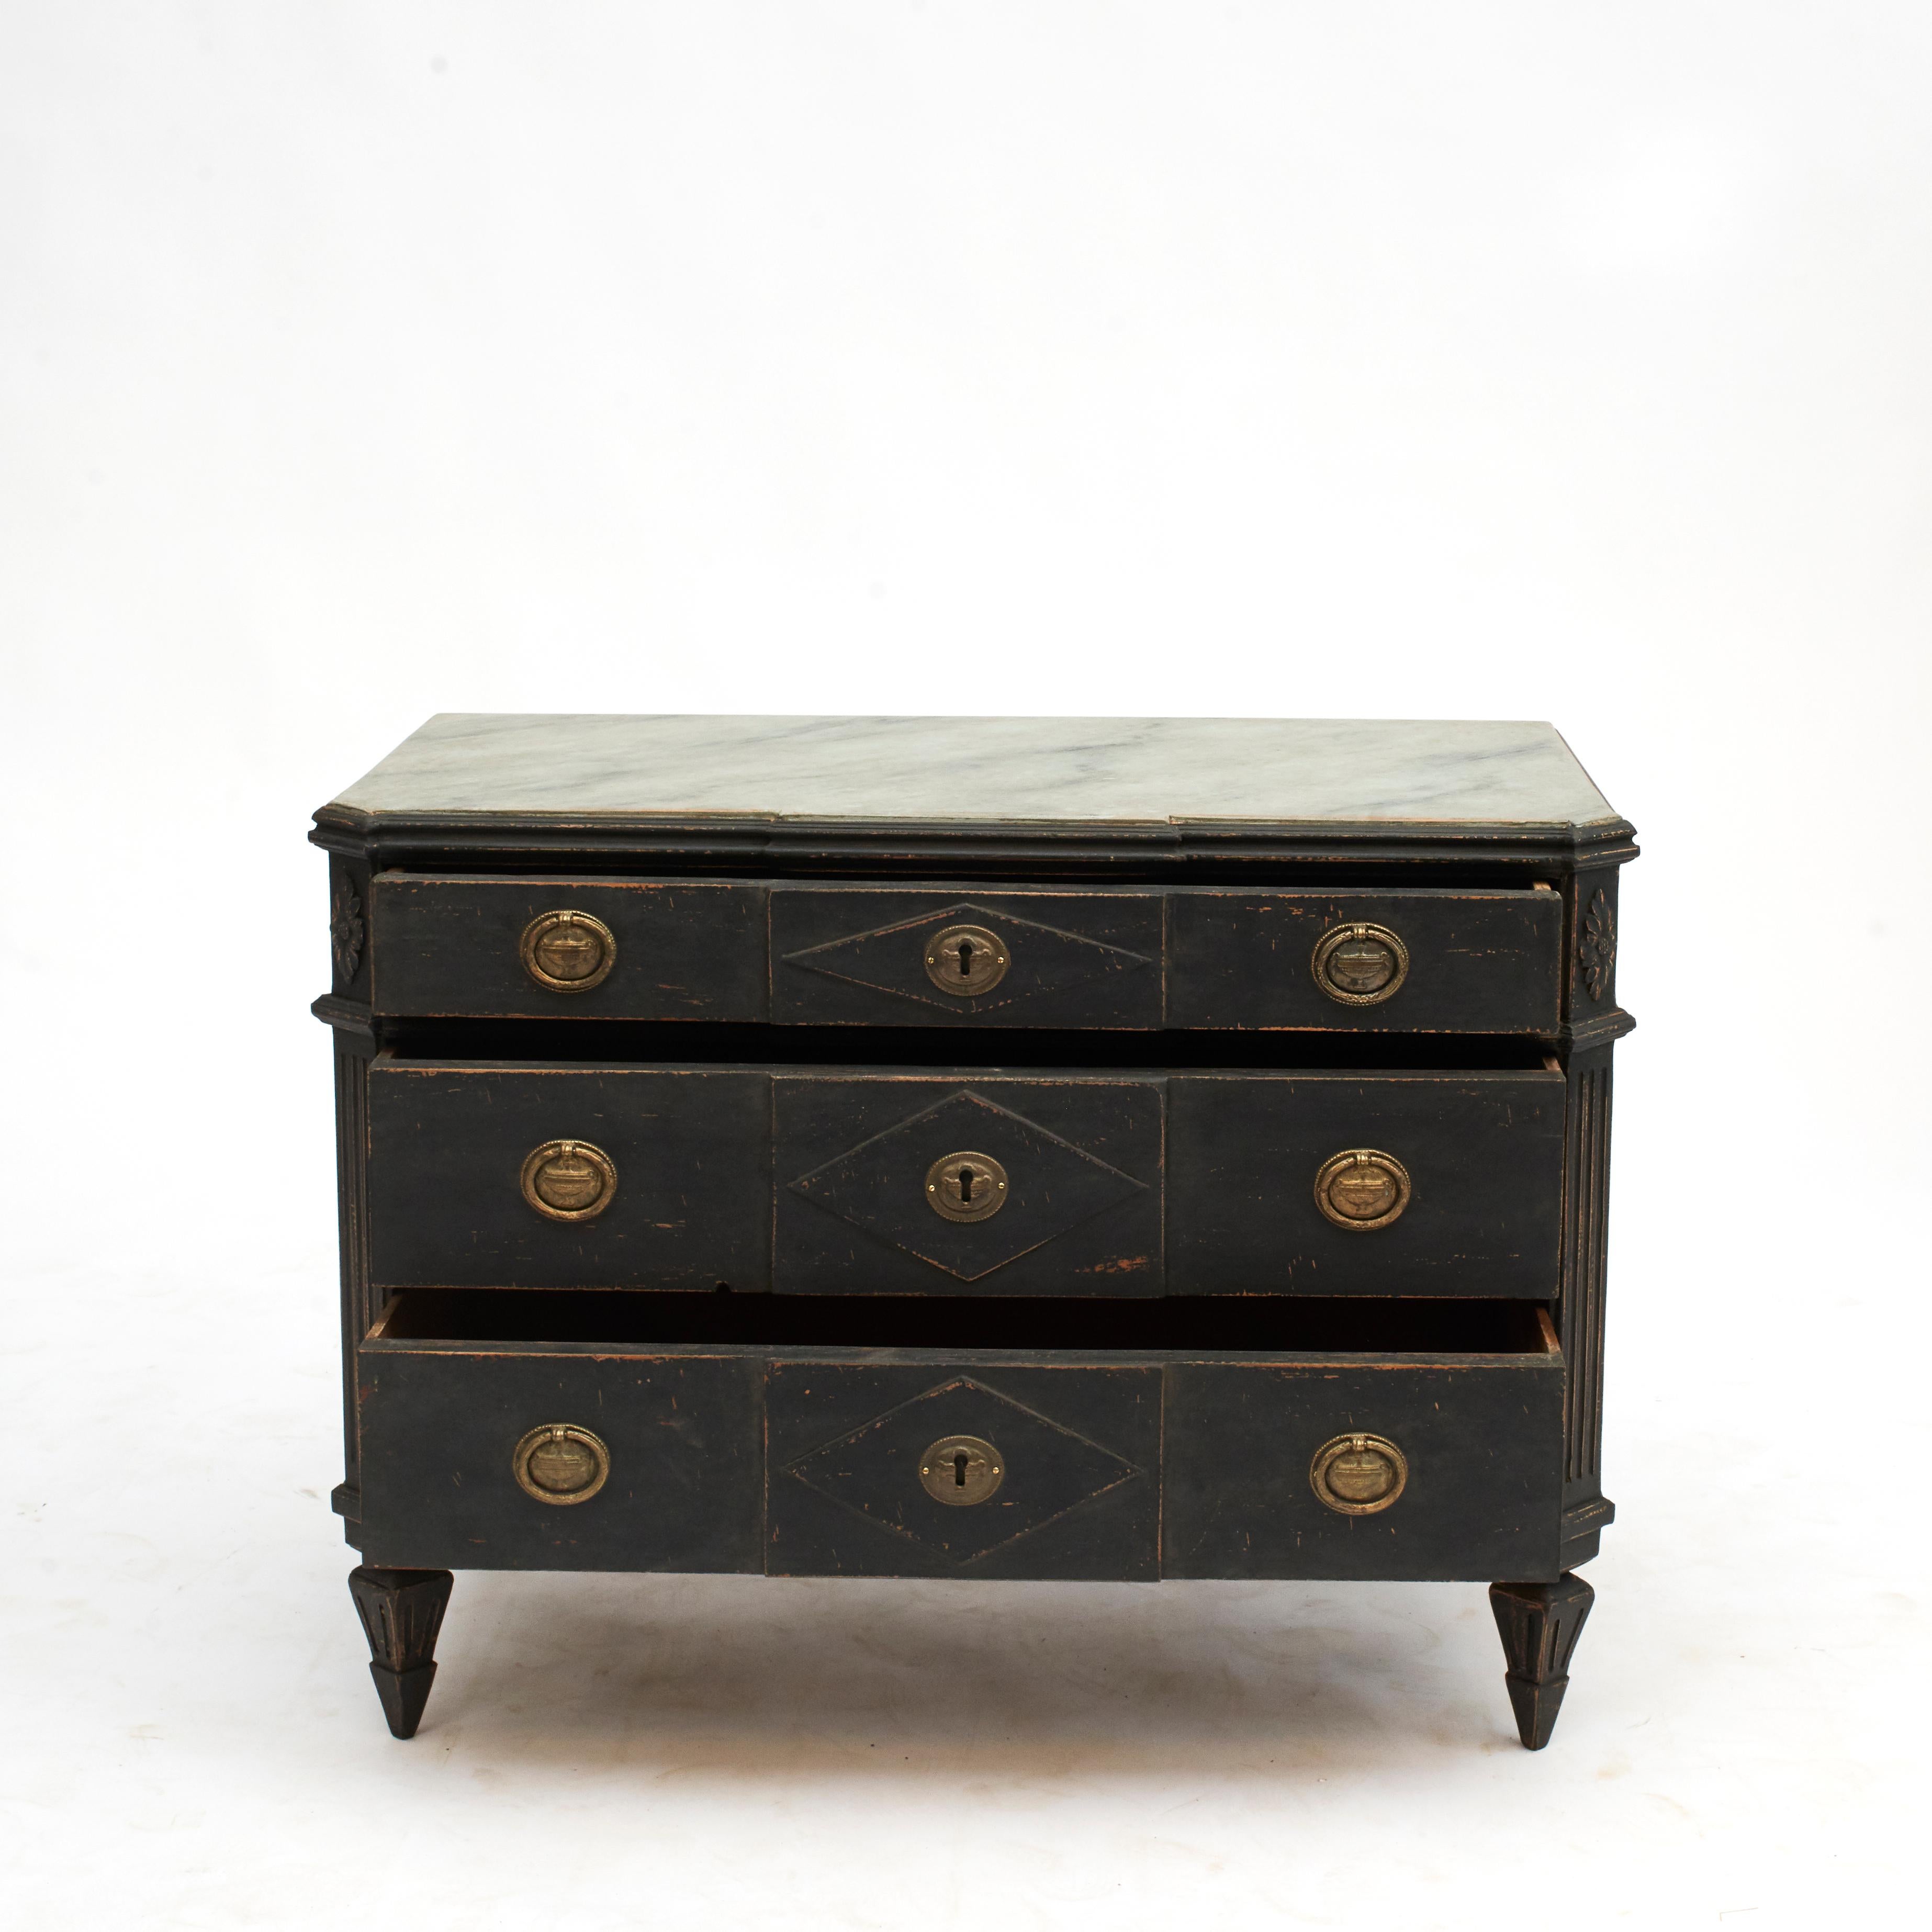 Painted Pair of Swedish Black Gustavian Style Breakfront Chests of Drawers